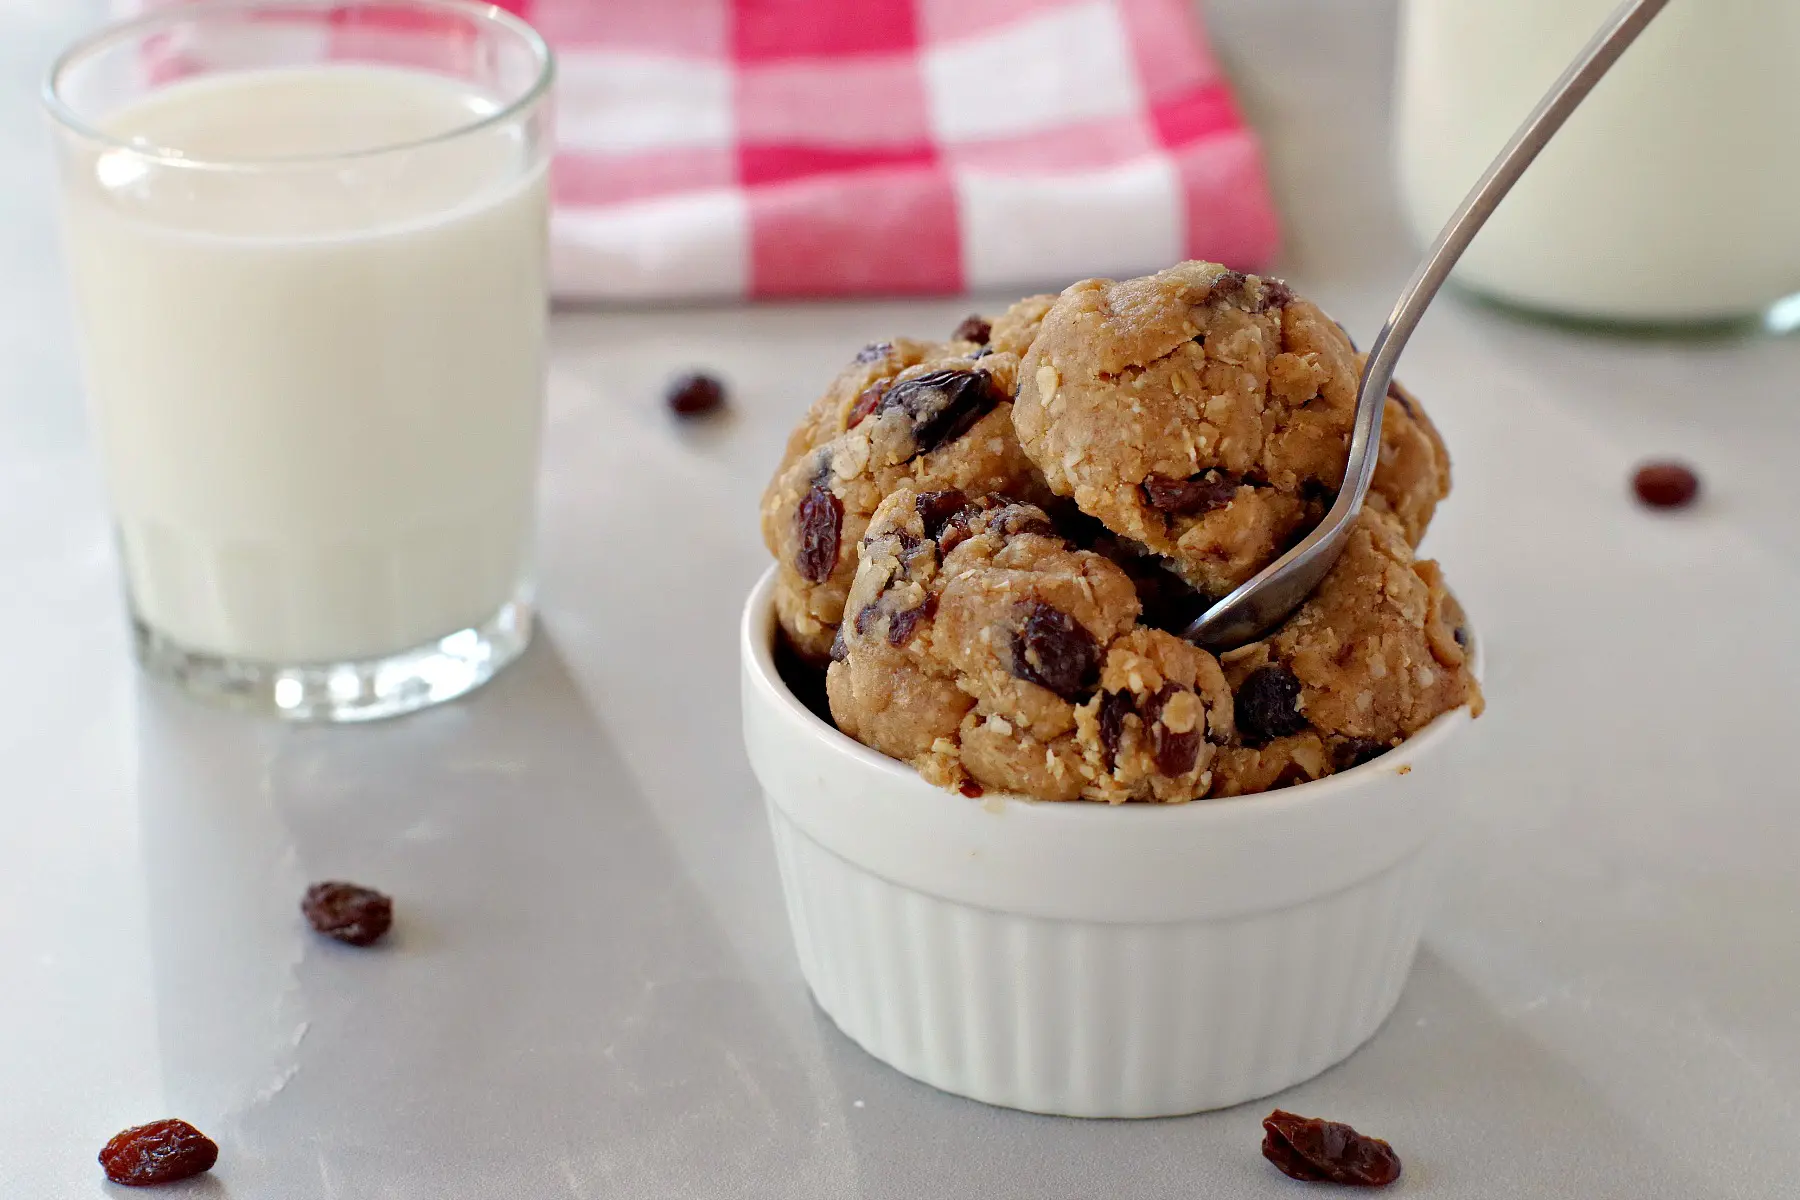 oatmeal raisin edible cookie dough in white bowl with spoon and glass of milk in the background